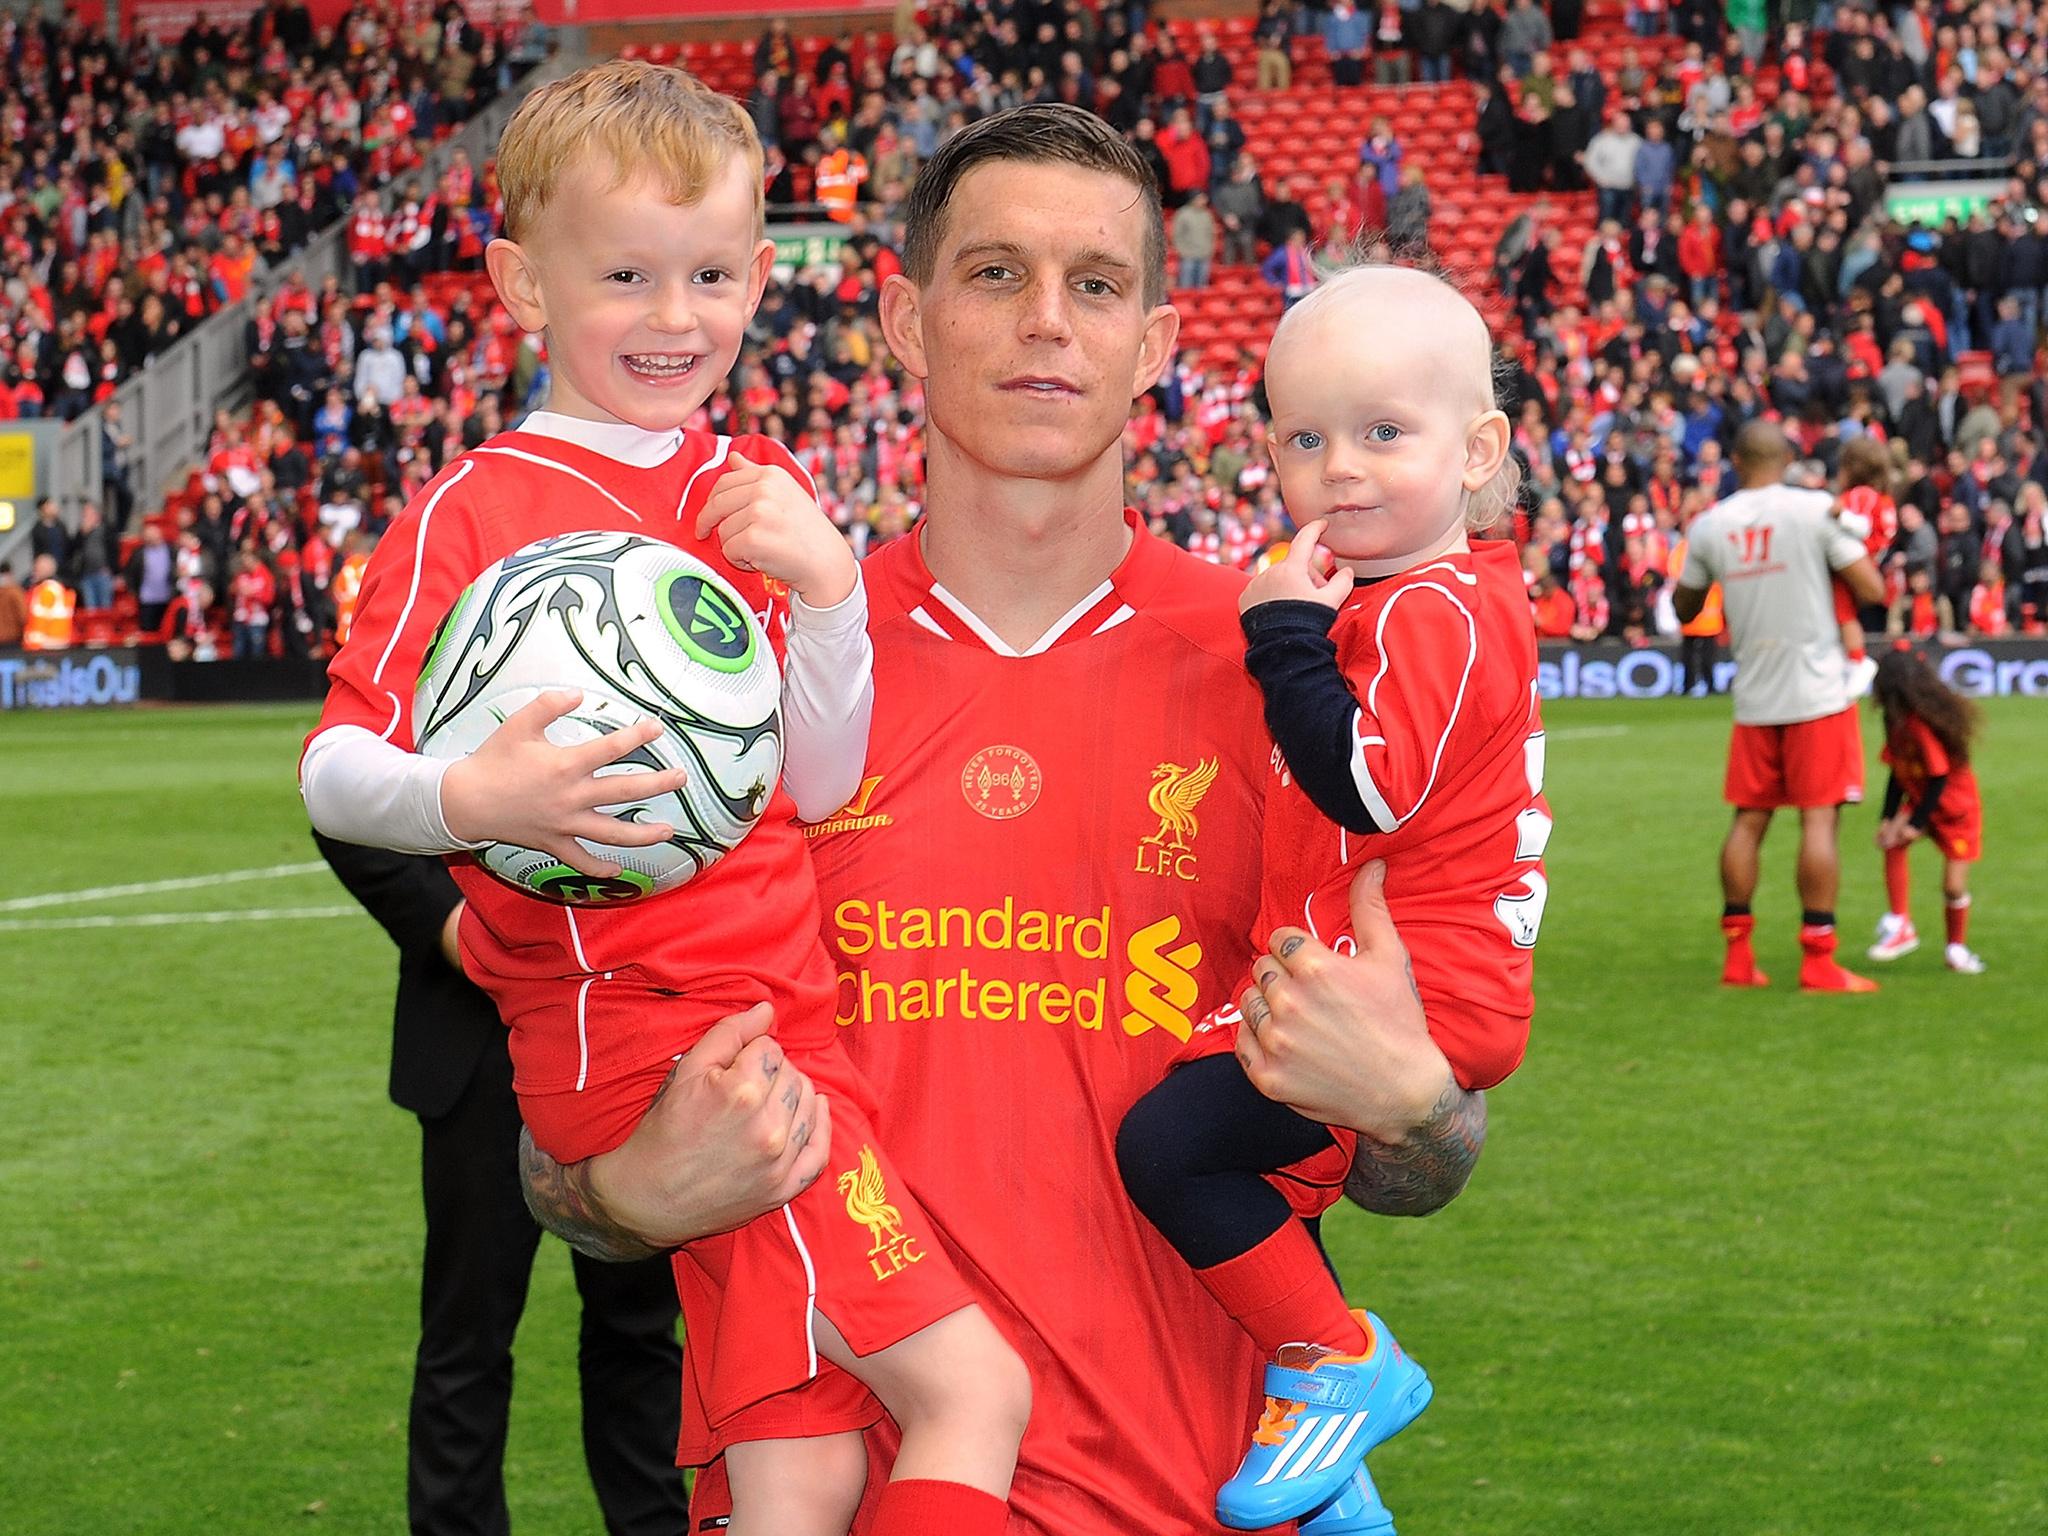 Agger enjoyed a successful eight-year spell at Anfield between 2006 and 2014